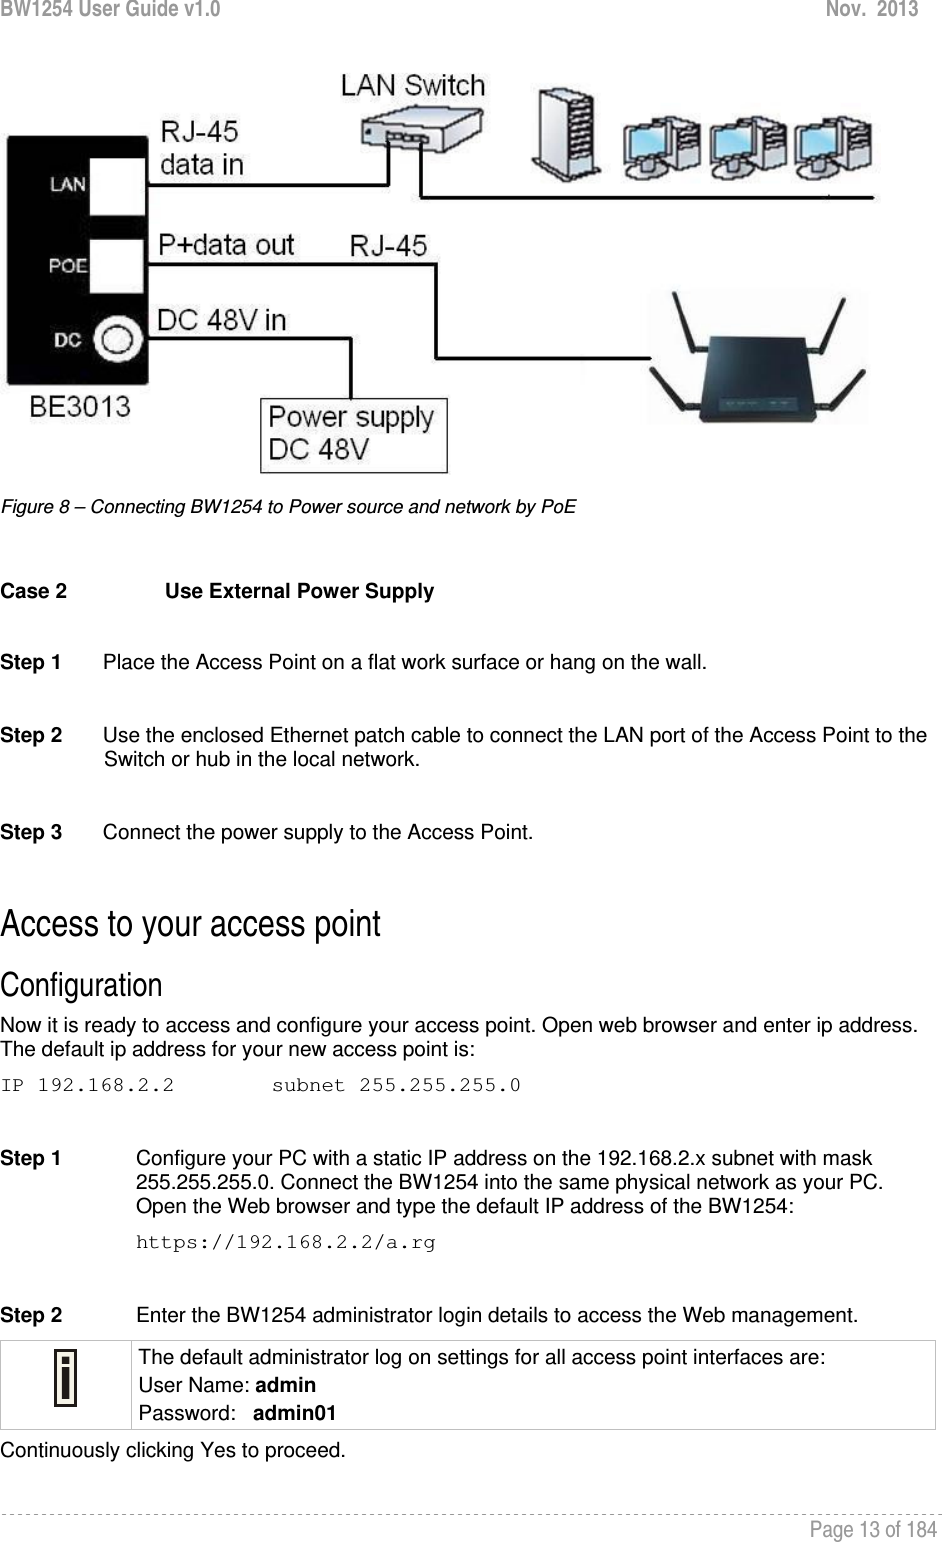 BW1254 User Guide v1.0  Nov.  2013     Page 13 of 184    Figure 8 – Connecting BW1254 to Power source and network by PoE  Case 2  Use External Power Supply  Step 1       Place the Access Point on a flat work surface or hang on the wall.  Step 2       Use the enclosed Ethernet patch cable to connect the LAN port of the Access Point to the Switch or hub in the local network.  Step 3       Connect the power supply to the Access Point.  Access to your access point Configuration  Now it is ready to access and configure your access point. Open web browser and enter ip address. The default ip address for your new access point is: IP 192.168.2.2  subnet 255.255.255.0  Step 1  Configure your PC with a static IP address on the 192.168.2.x subnet with mask 255.255.255.0. Connect the BW1254 into the same physical network as your PC. Open the Web browser and type the default IP address of the BW1254: https://192.168.2.2/a.rg  Step 2  Enter the BW1254 administrator login details to access the Web management.  The default administrator log on settings for all access point interfaces are: User Name: admin Password:   admin01 Continuously clicking Yes to proceed. 